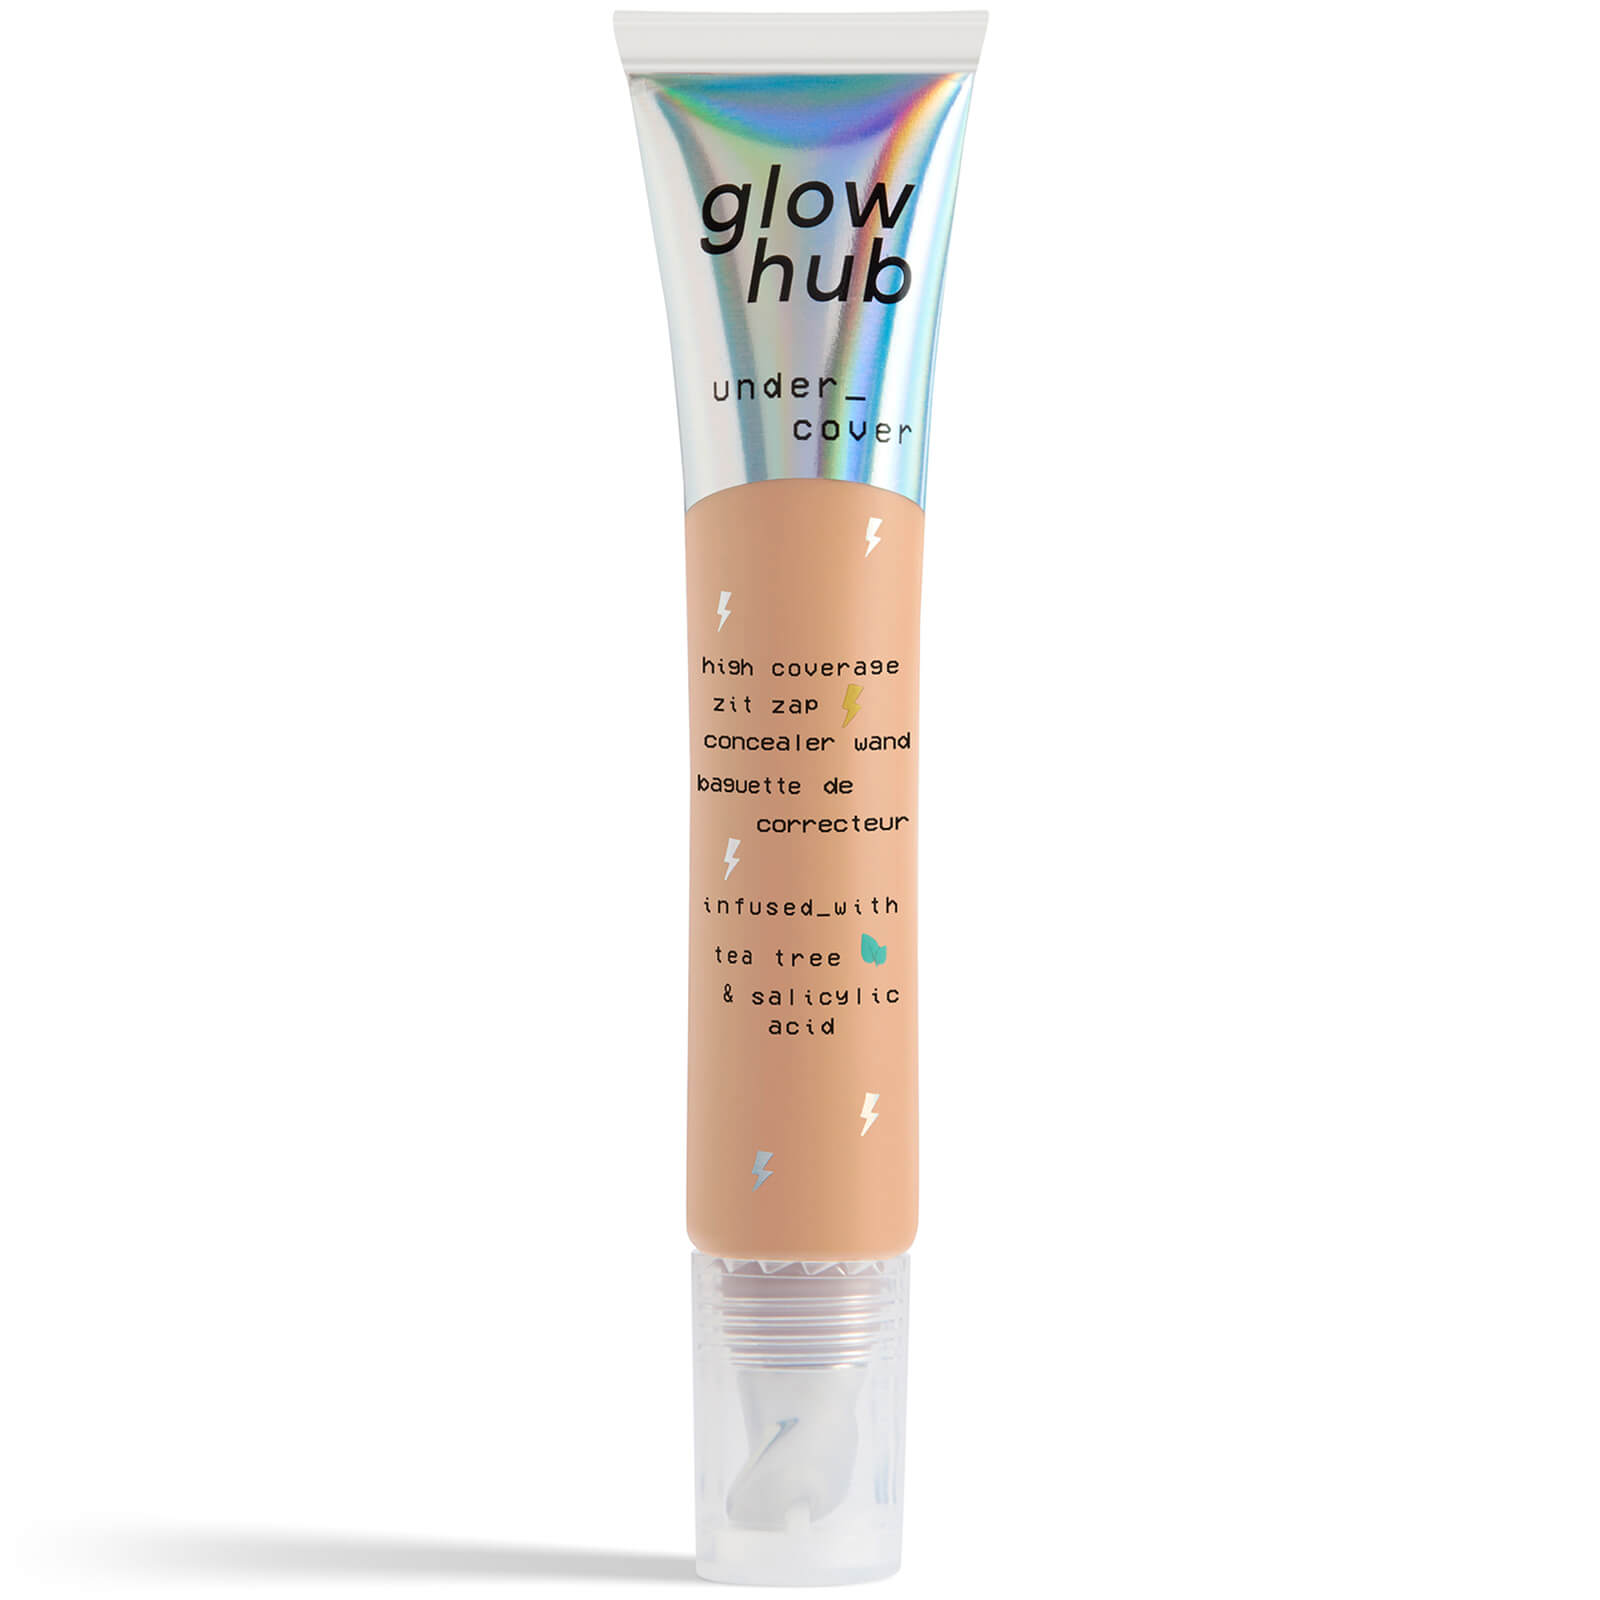 Glow Hub Under Cover High Coverage Zit Zap Concealer Wand 15ml (various Shades) - 14c In Neutral